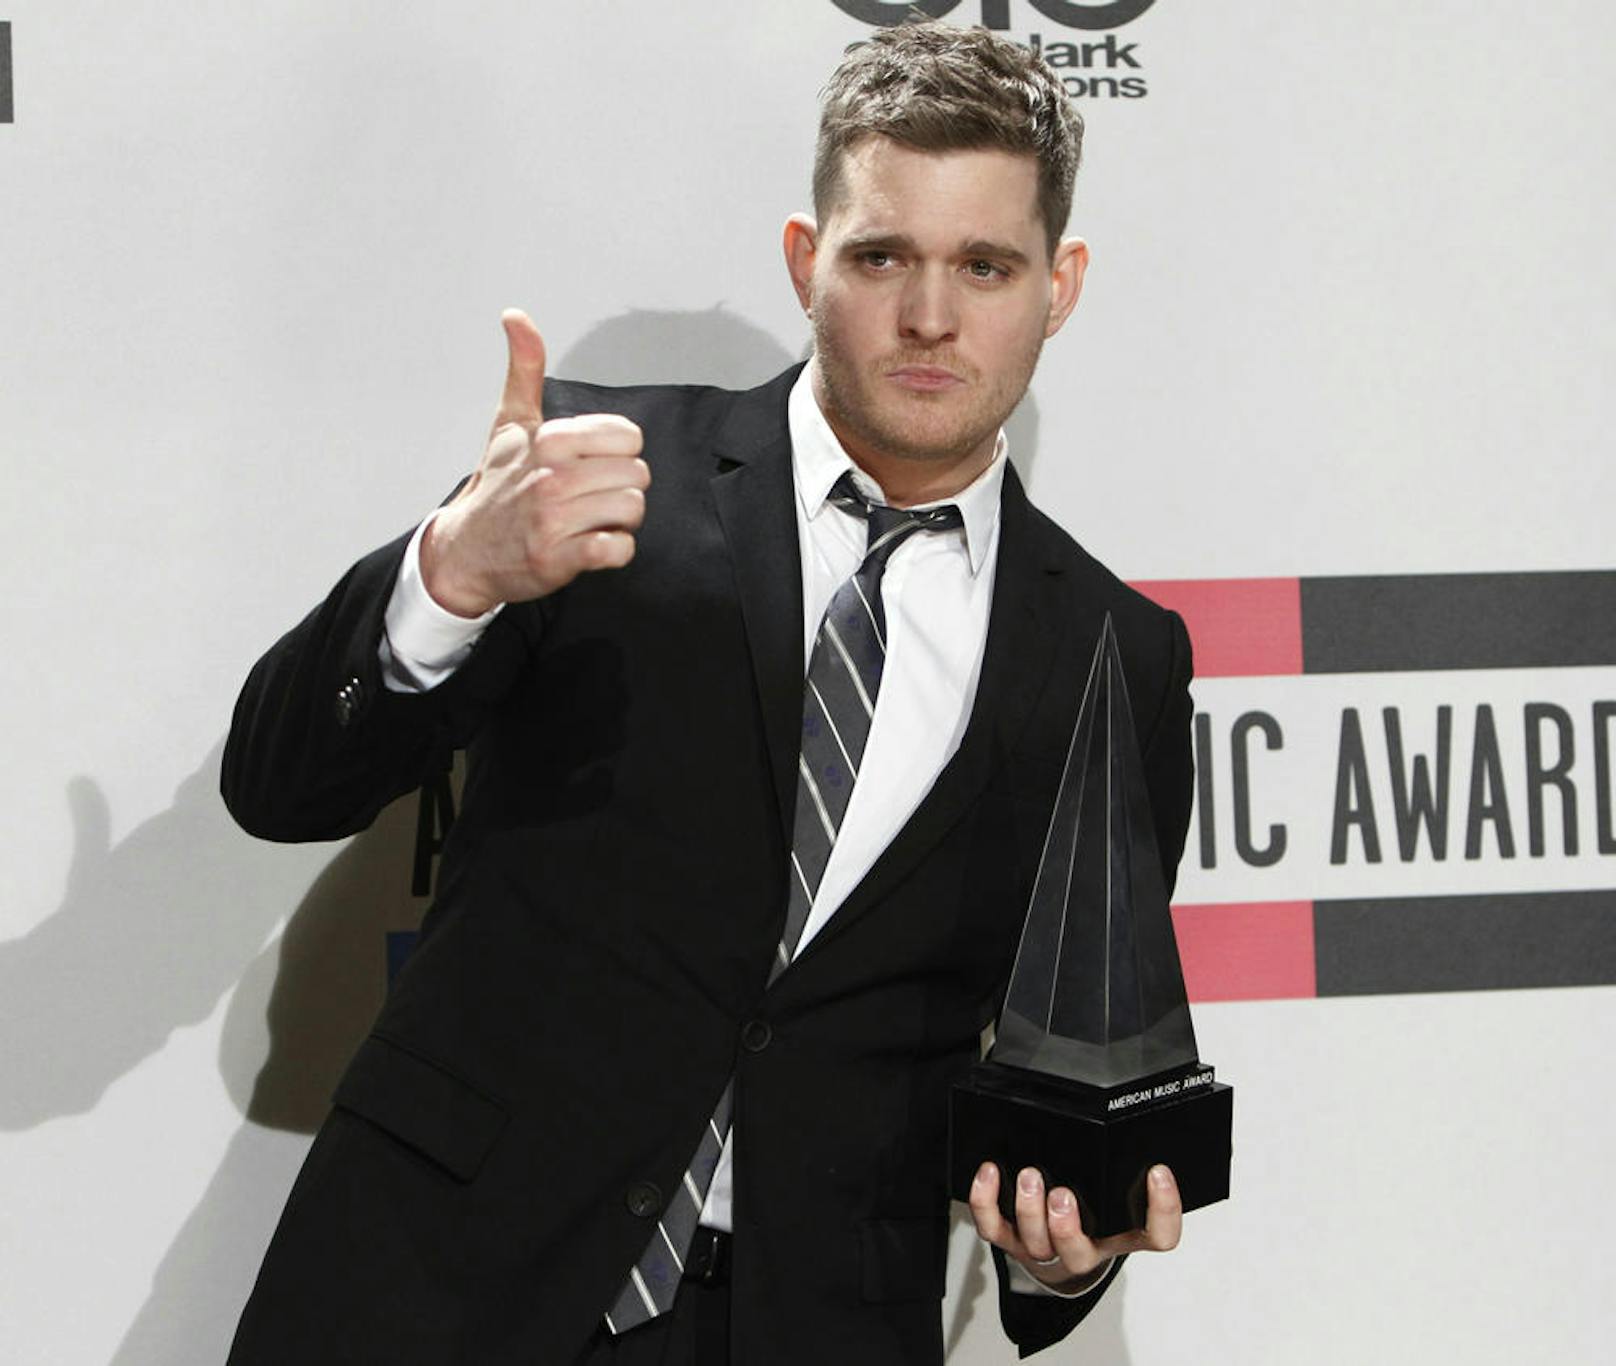 Michael Buble 2010 bei den American Music Awards in Los Angeles.